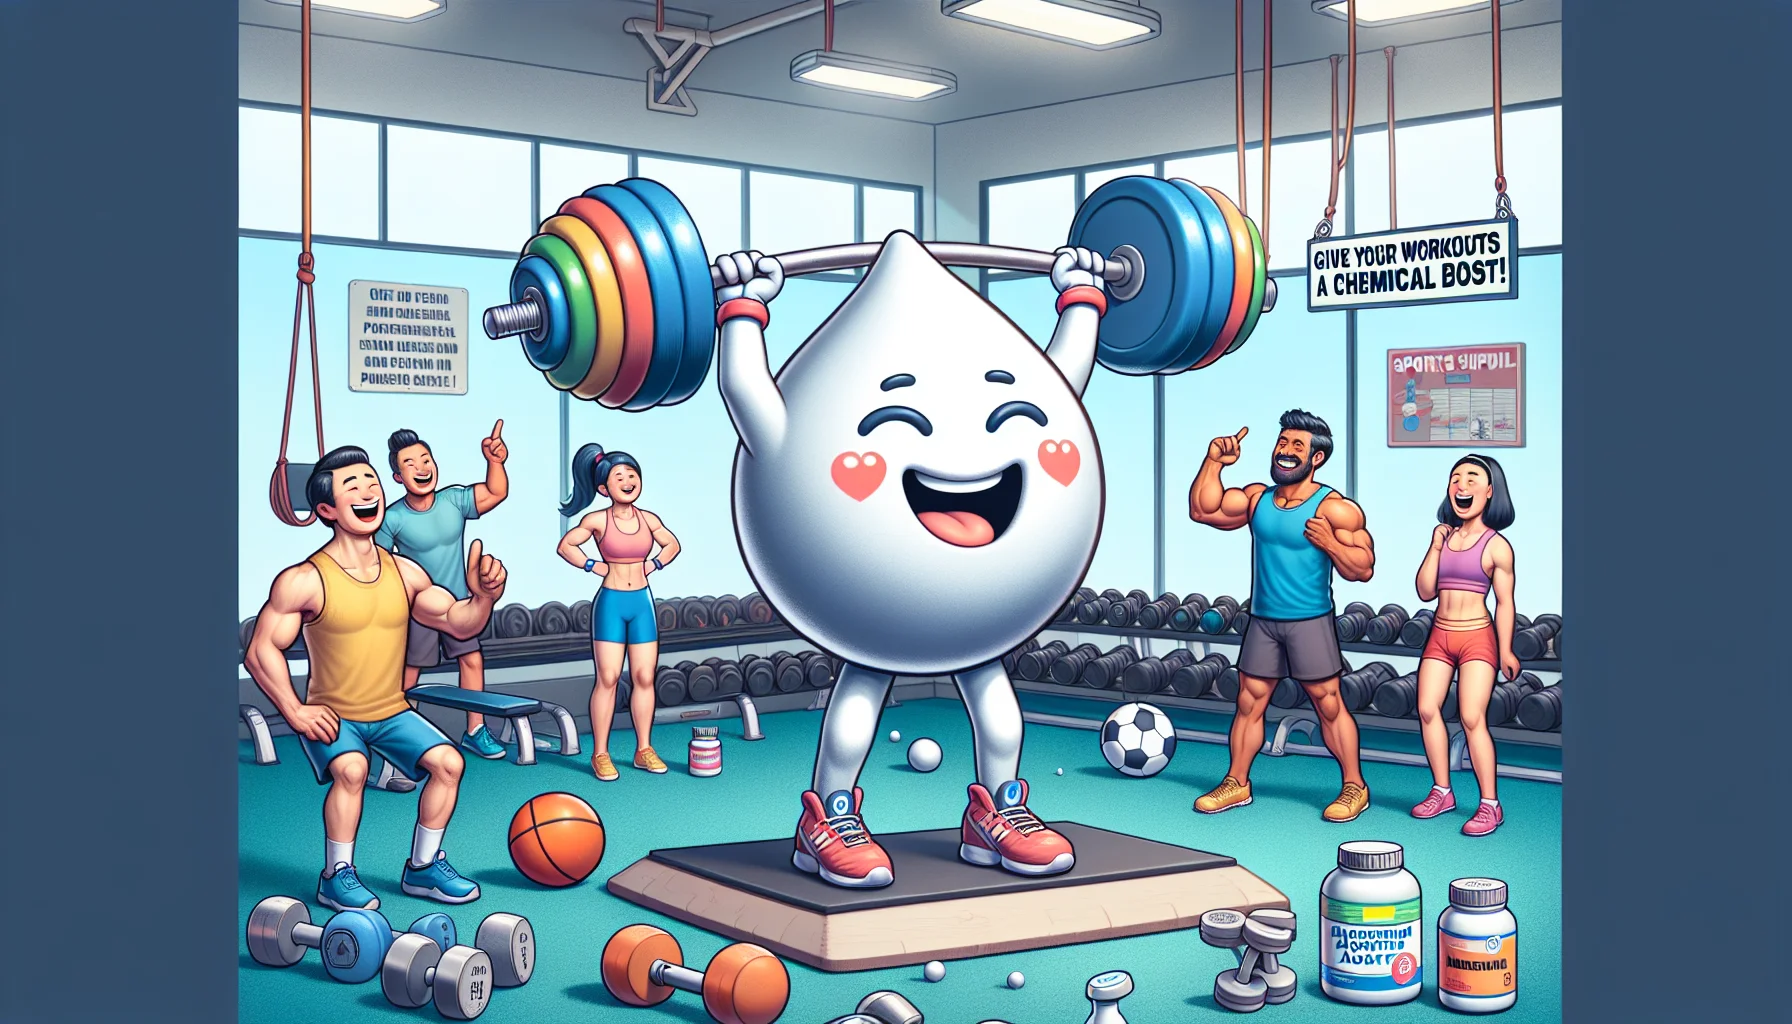 Create a humorous scenario where a giant, anthropomorphic, happily grinning magnesium acetate moleule is attempting to lift weights in a gymnasium. The weights on the barbell are shaped like sports icons - a football, a basketball and a tennis racket. A diverse group of gym-goers, an Asian female bodybuilder and a Middle-Eastern male runner, are laughing and pointing, amused by the spectacle. Scattered around the scene are various sports supplement bottles, and a billboard in the background reads, 'Give your workouts a 'chemical' boost!'. Make sure everything is depicted in a positive, light-hearted manner, promoting the usage of supplements during sports.